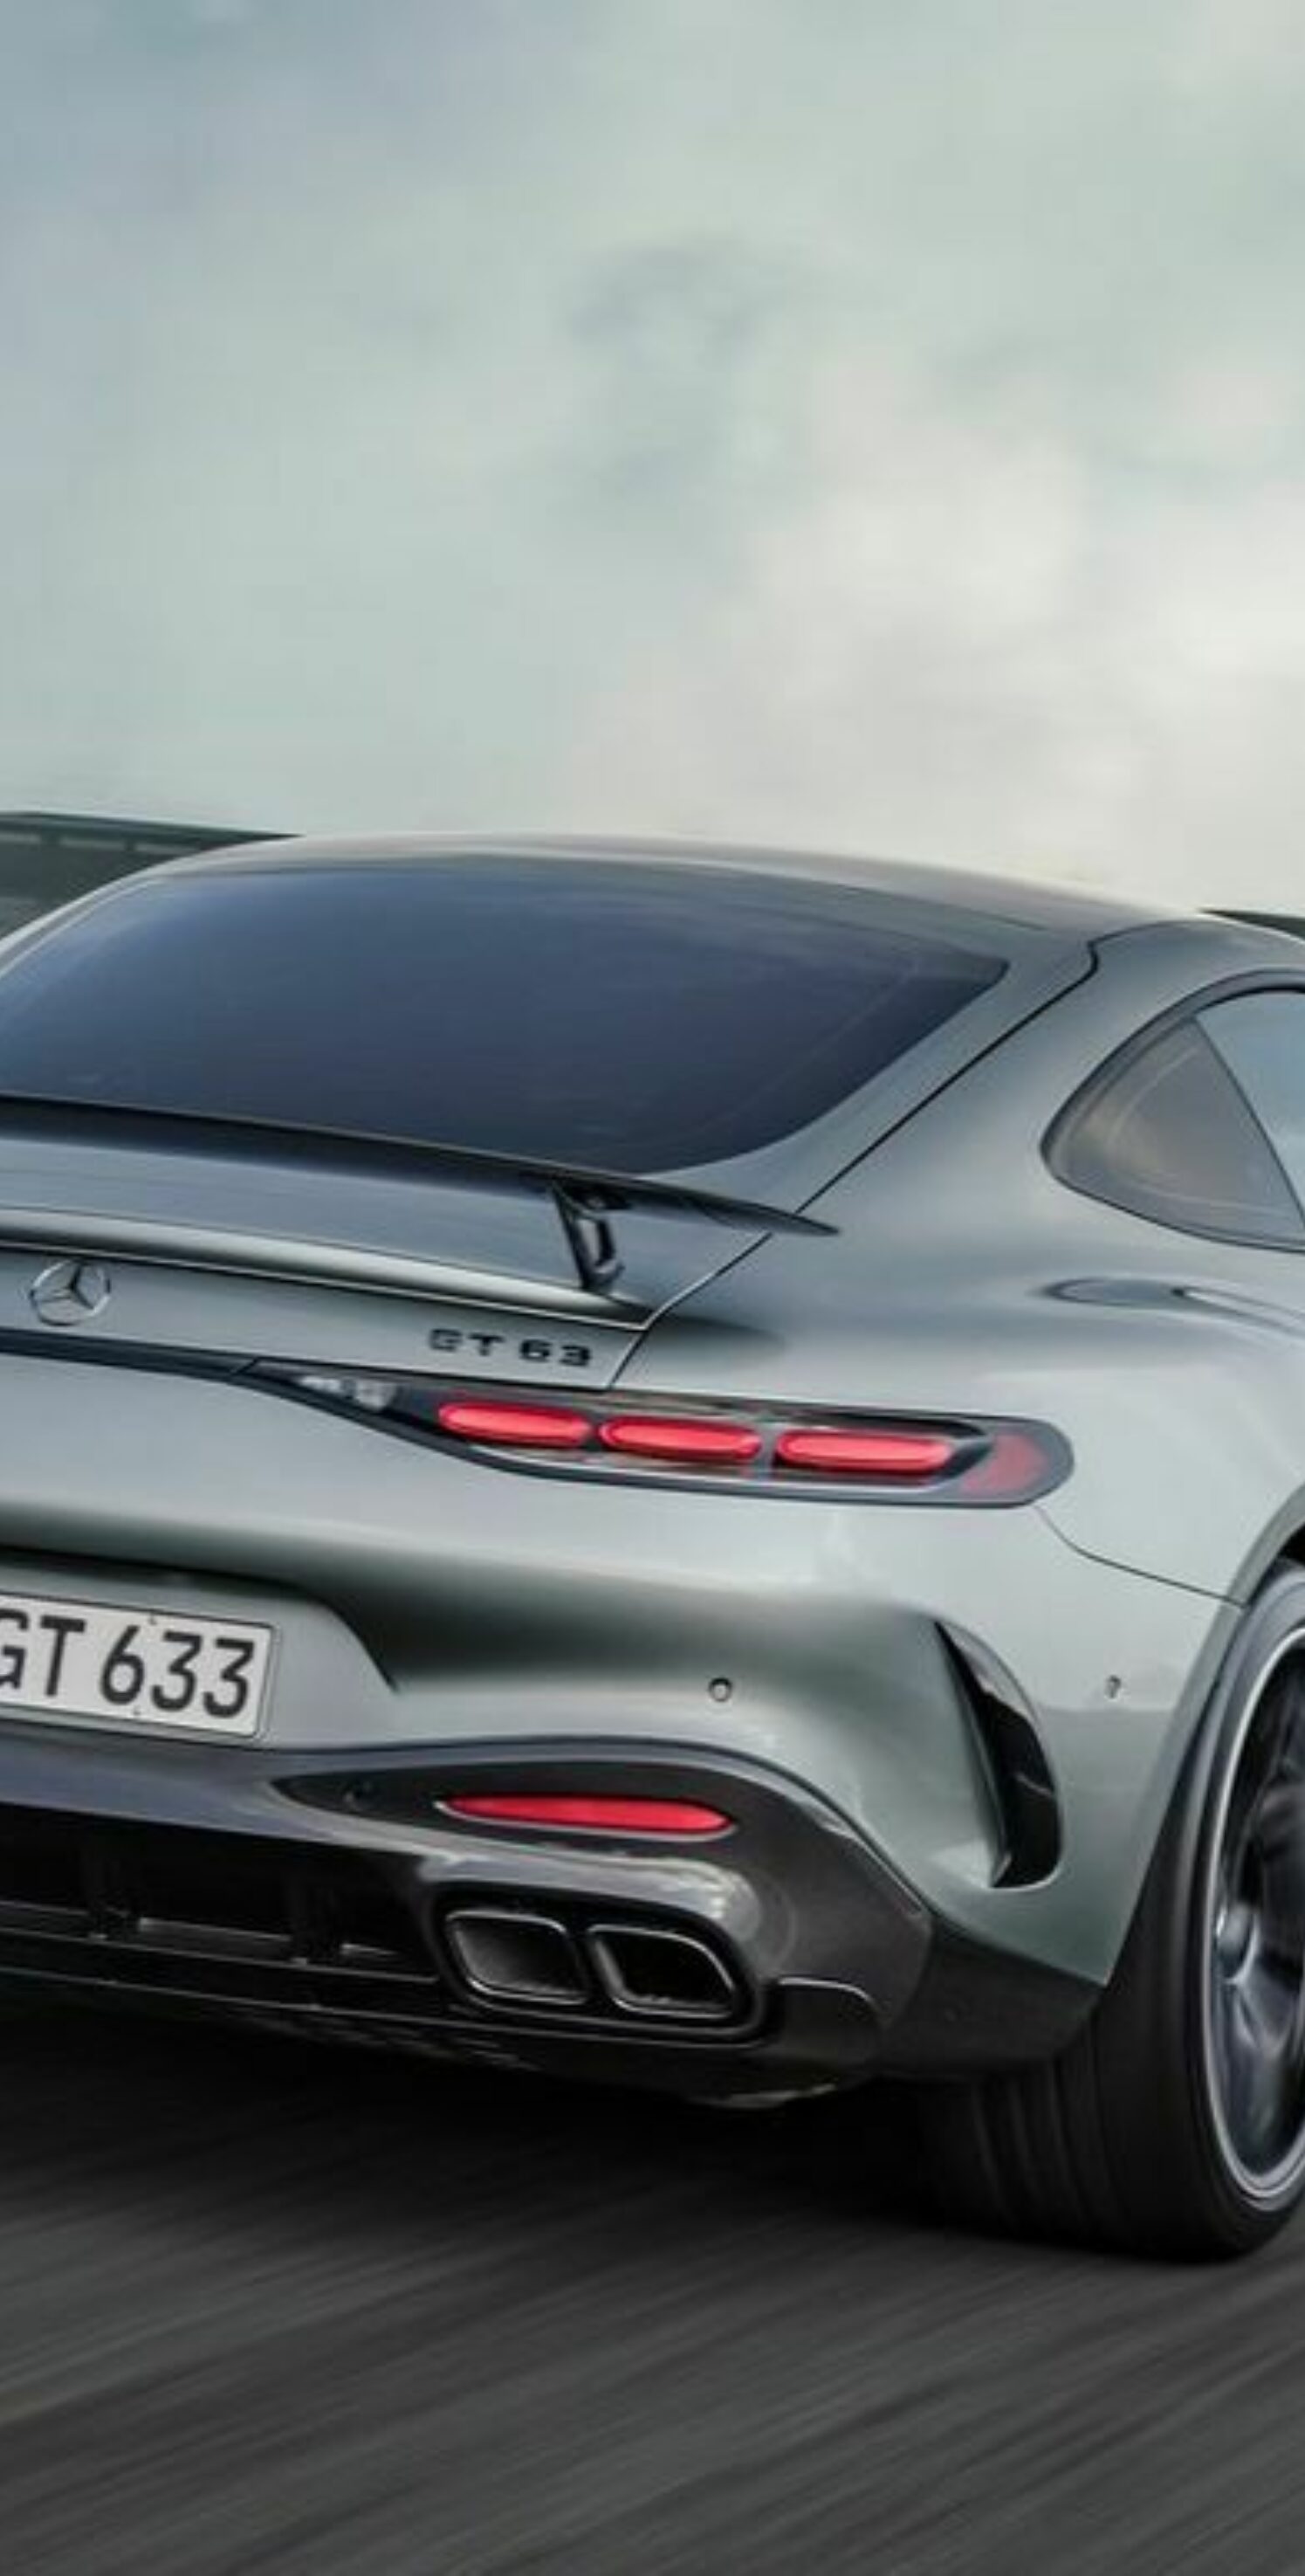 https://autofilter.sk/assets/images/amg-gt-kupe/gallery/mercedes-amg-gt-coupe-5-galeria.jpg - obrazok